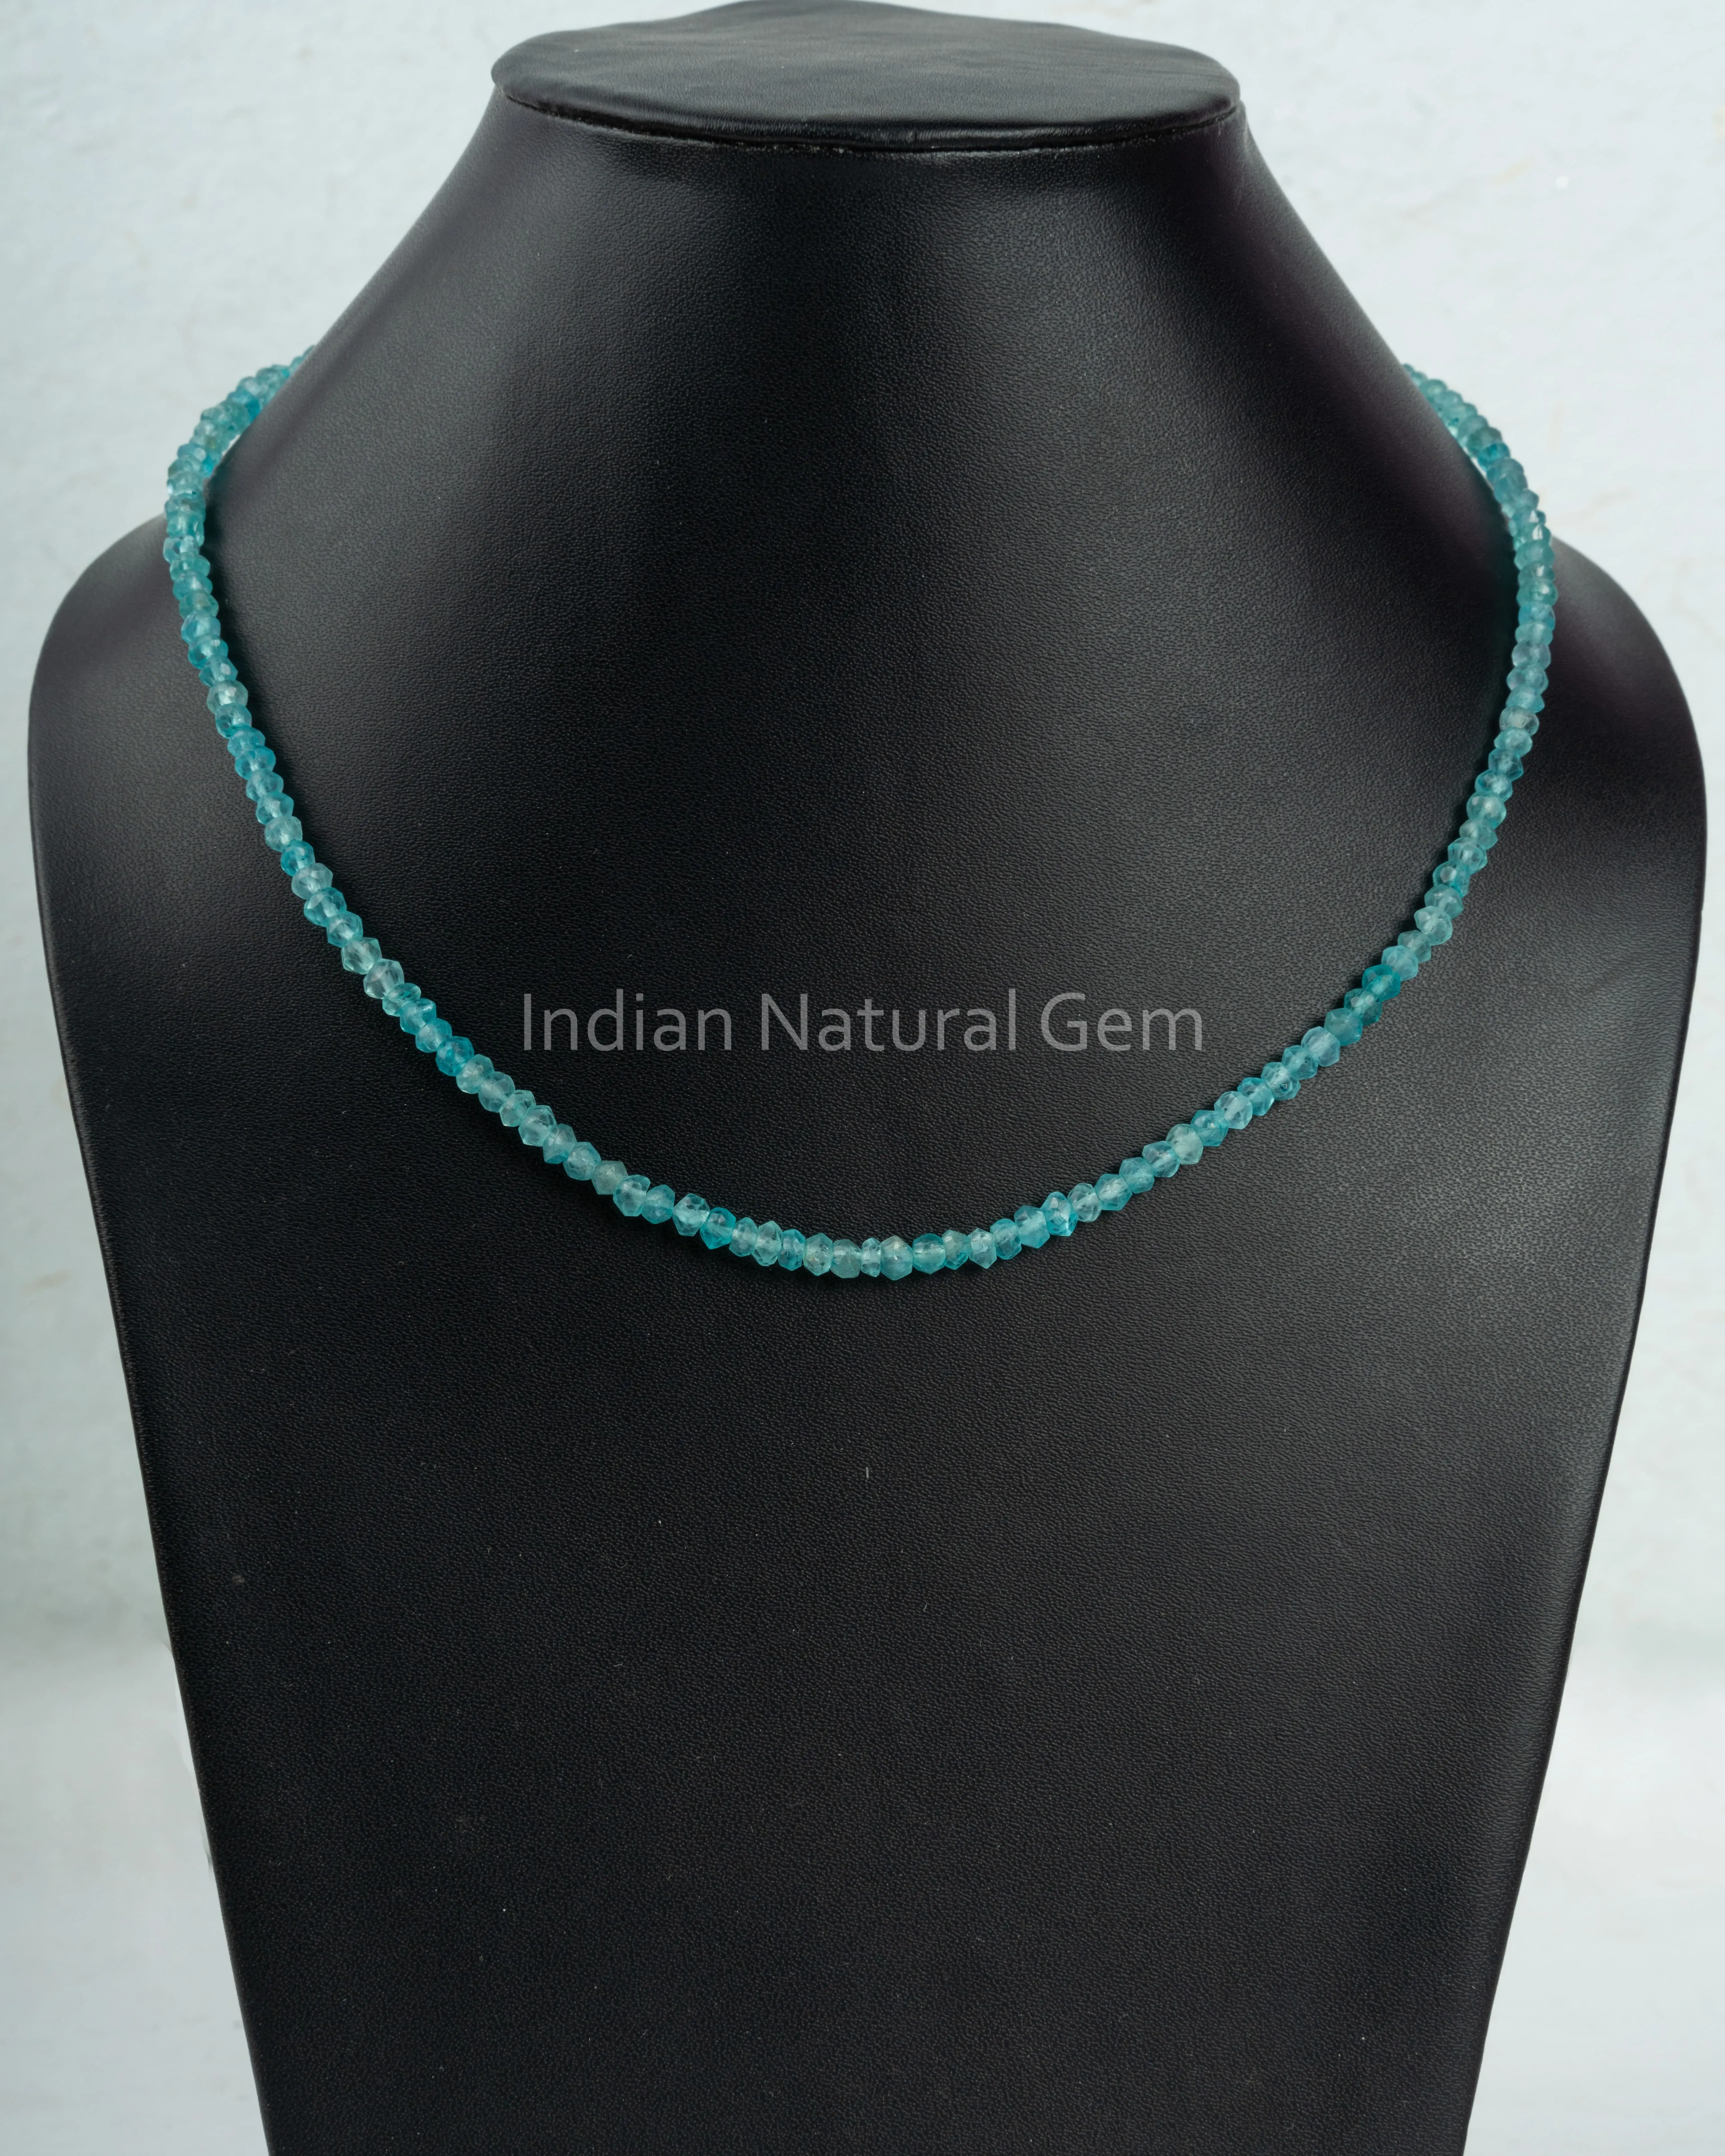 2022 Fashion Jewelry 100 % AAA Natural Sky Apatite Faceted Rondelle Necklace 3.5 - 4.5mm 925 Sterling Silver Handmade Jewelry